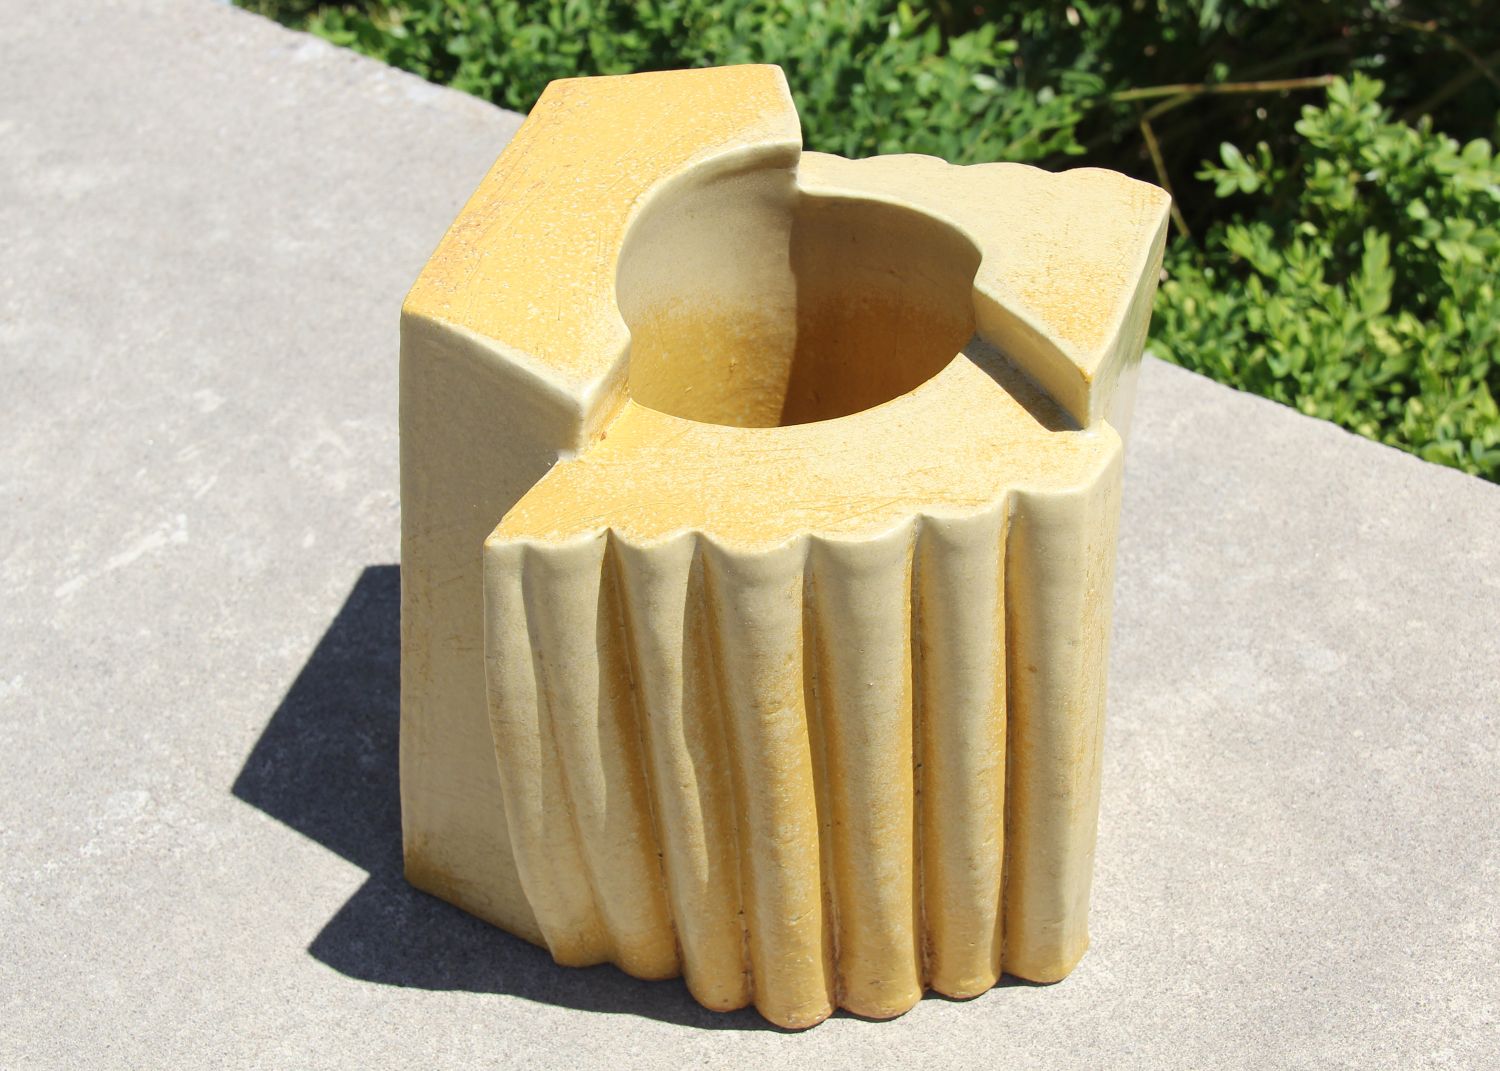 Bruce Cochrane: Sculptural Vase in Yellow Product Image 3 of 5